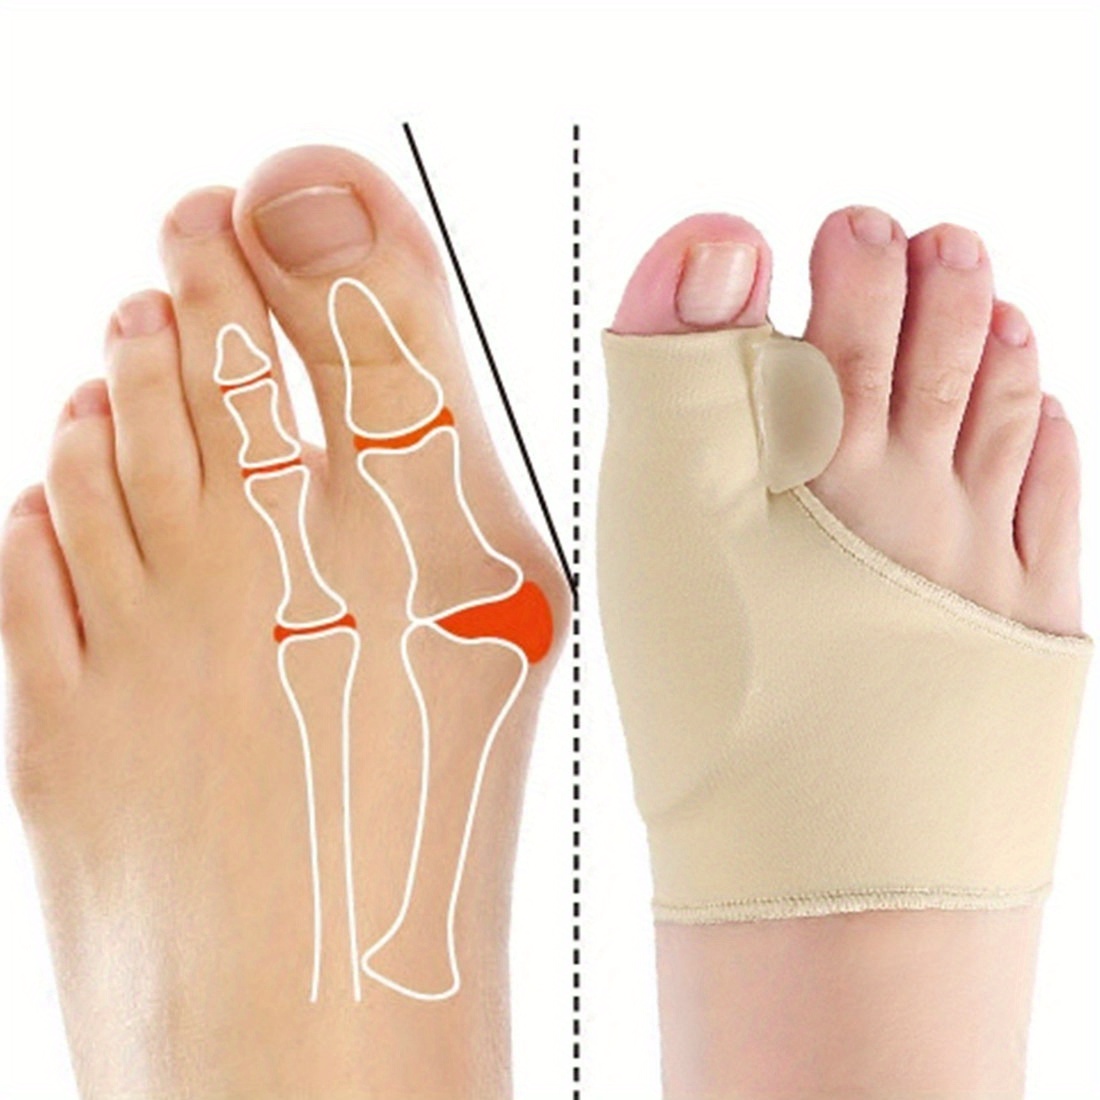 

1 Pair Foot Care Toe Corrector - Bone Thumb Adjuster For Pedicure And Bunion